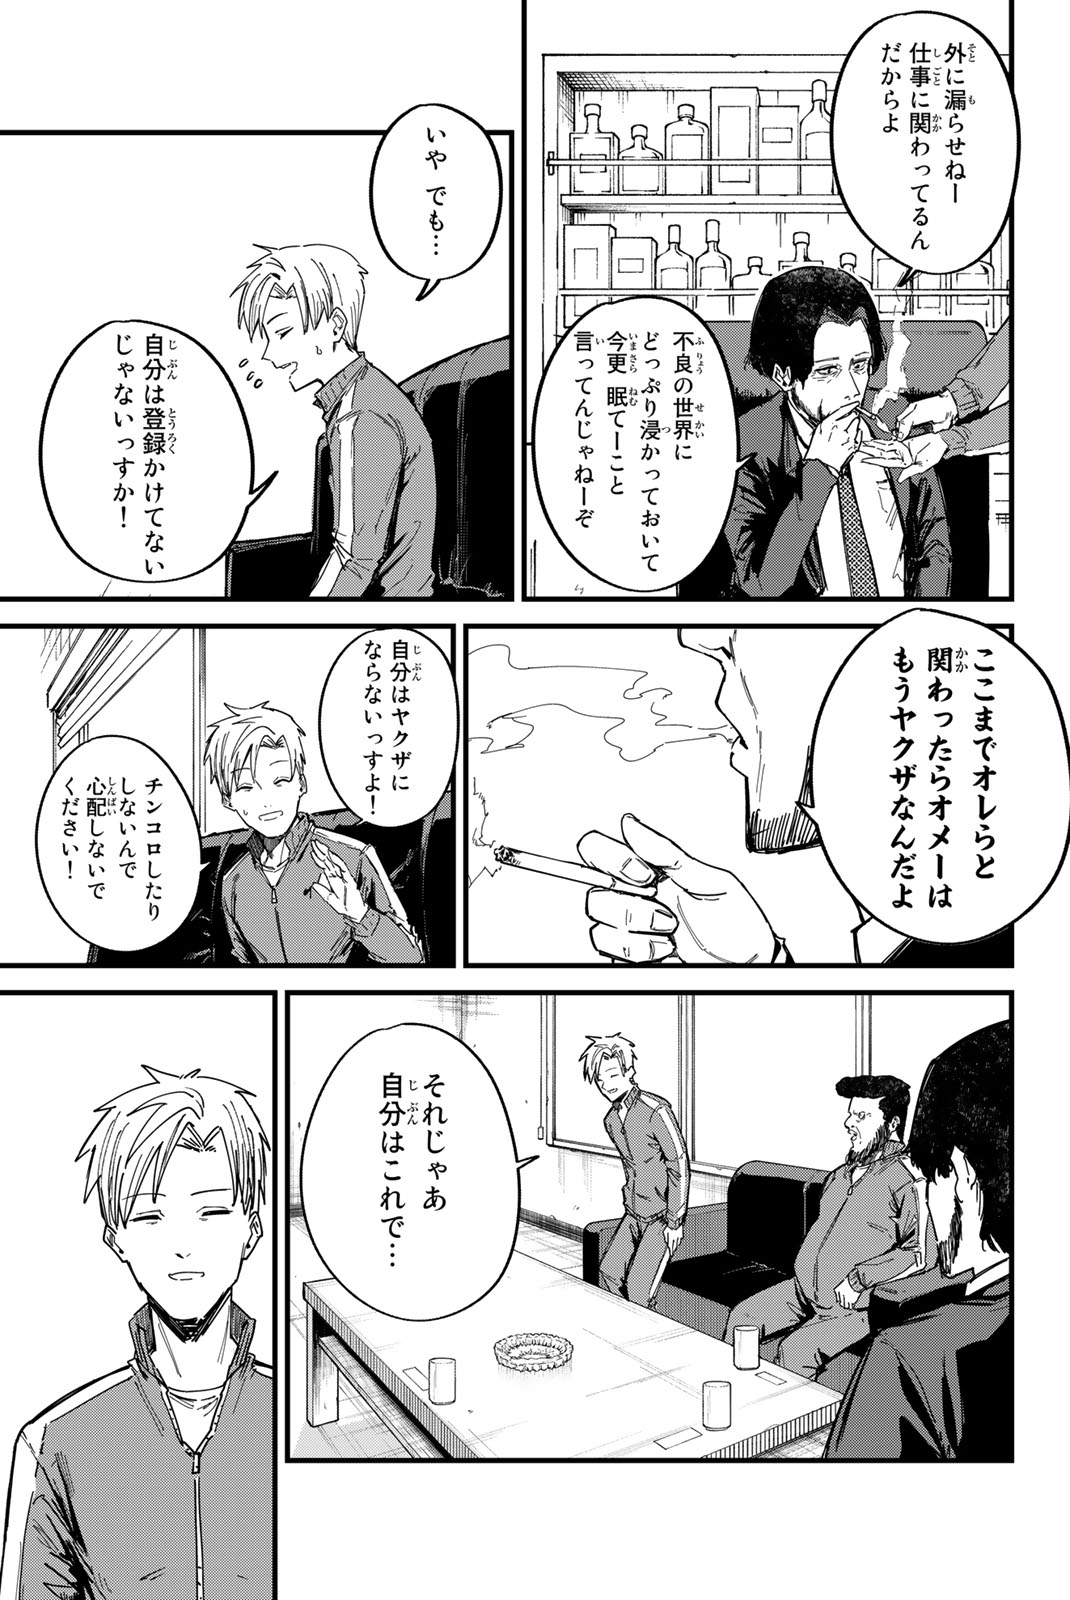 REDRUM 第1.1話 - Page 13